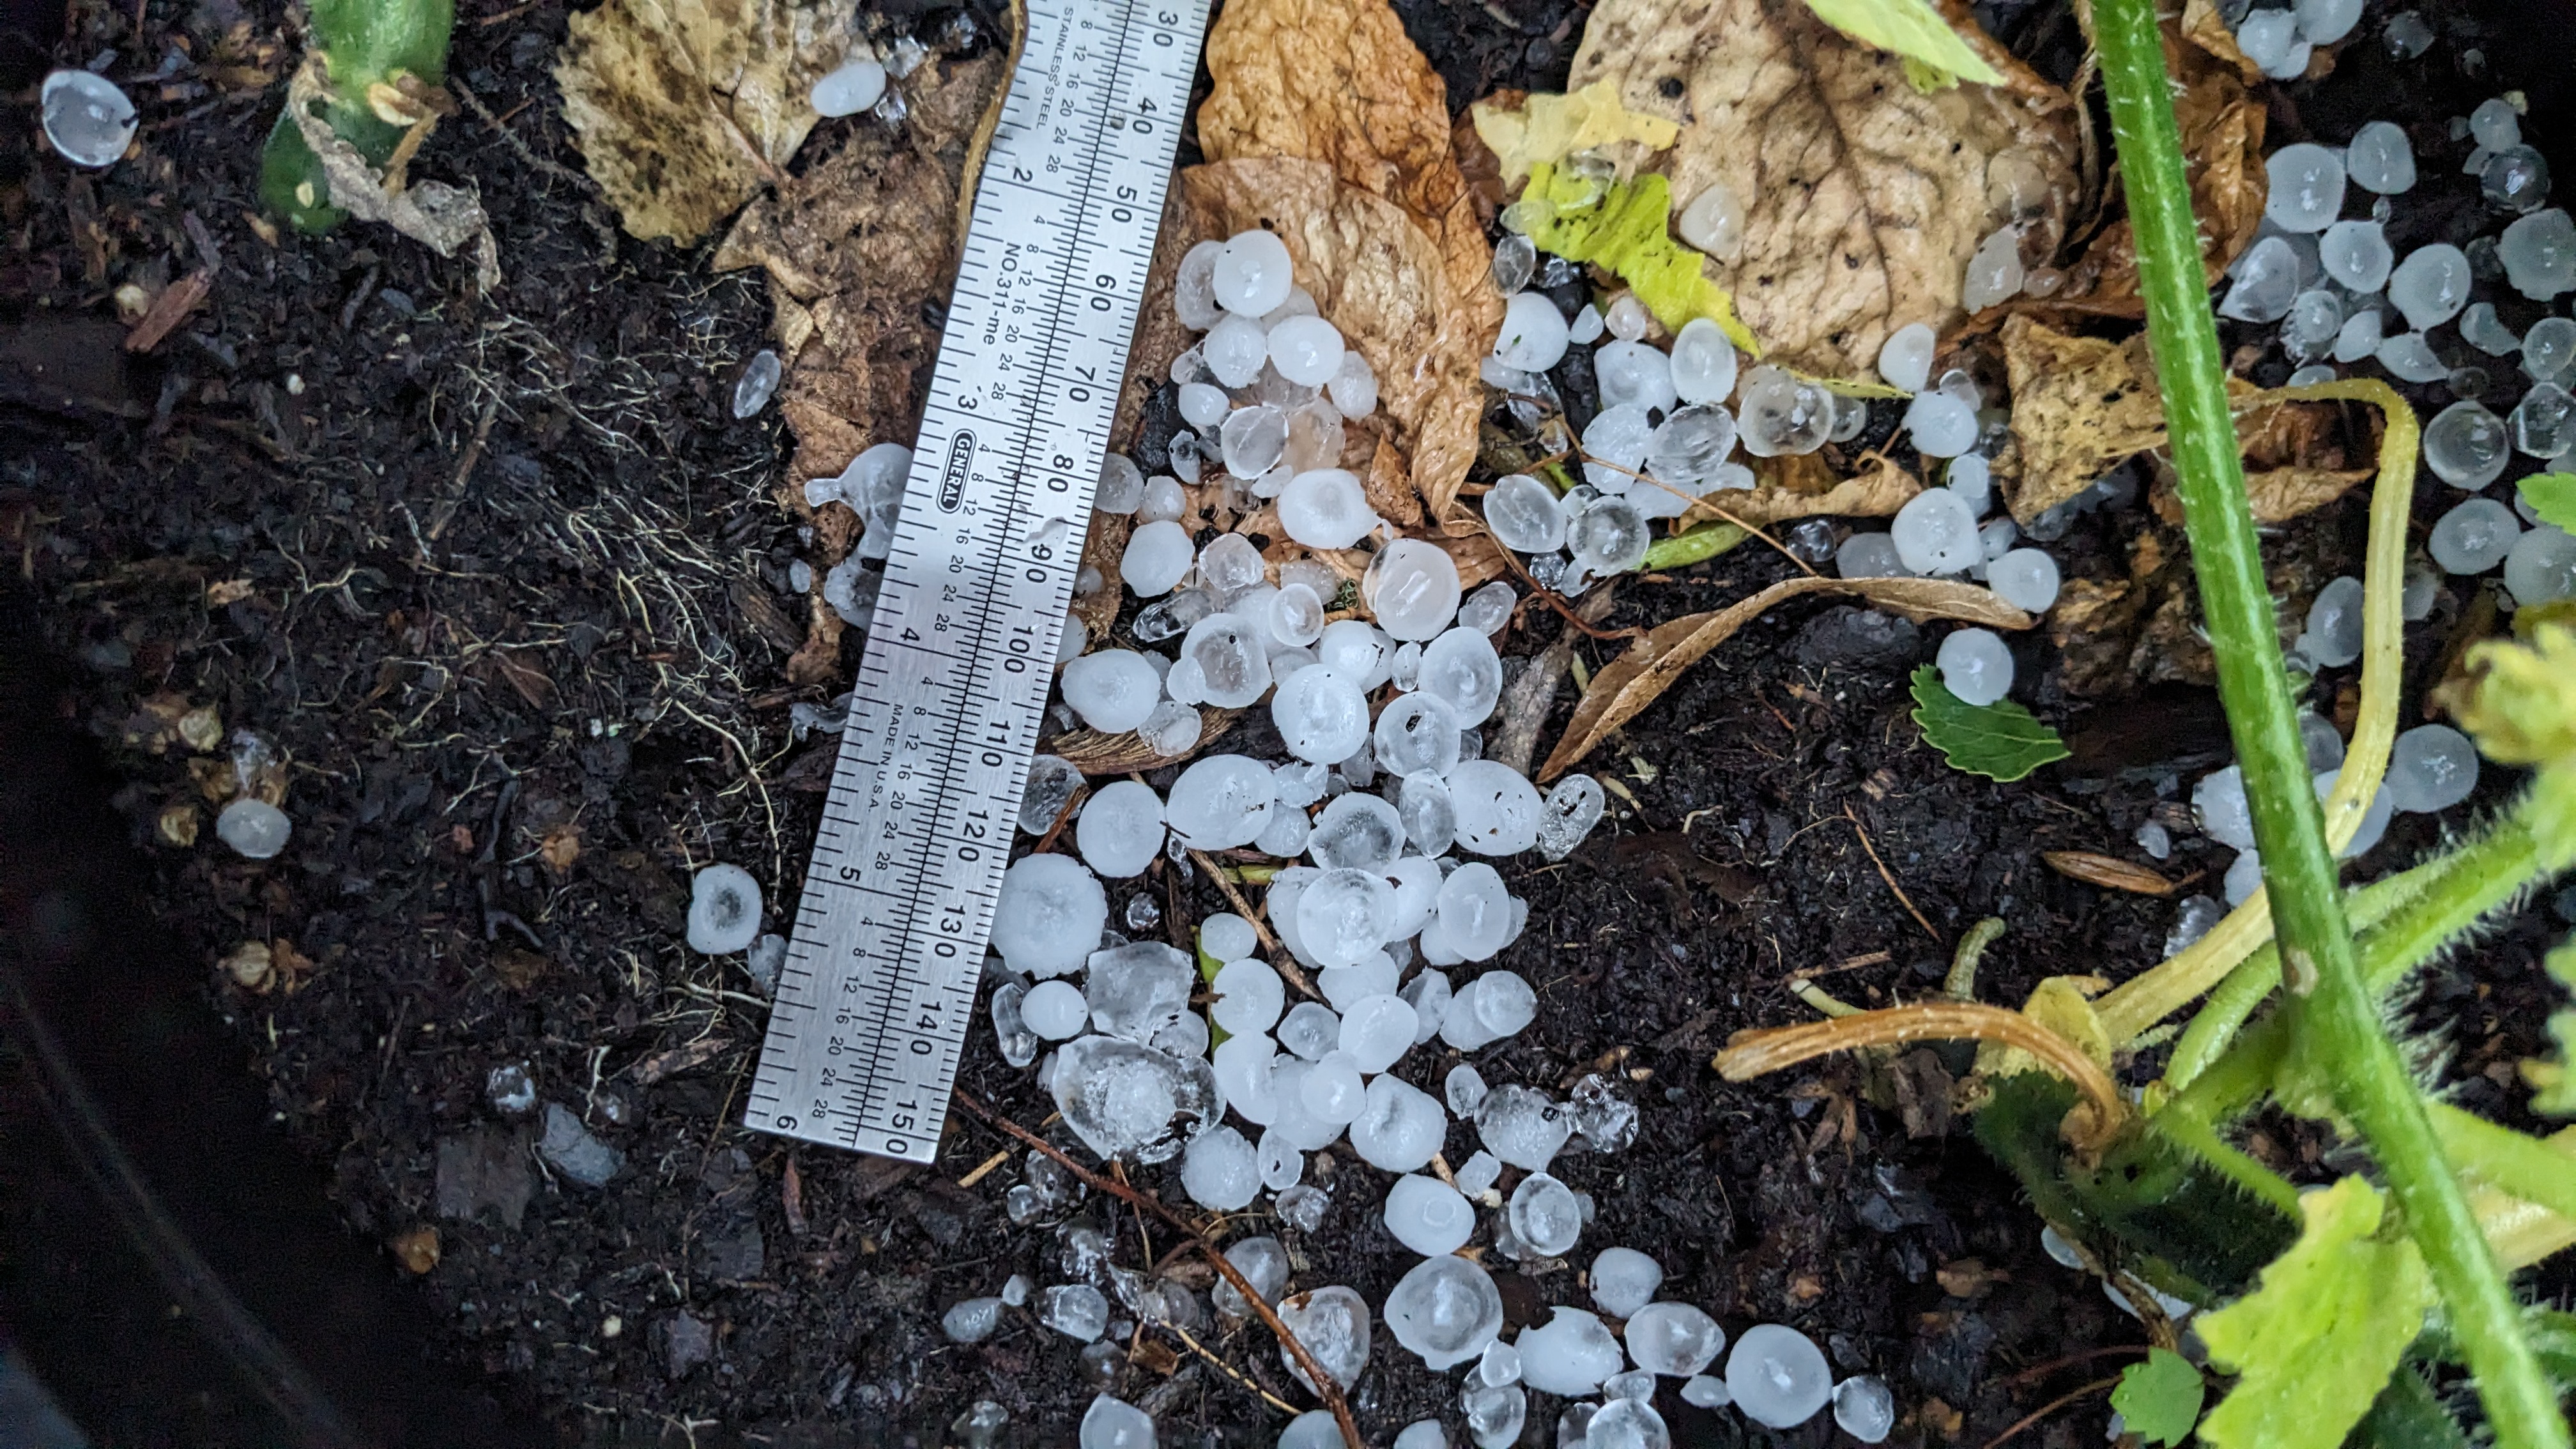 Numerous hail stones on the ground with a ruler next to them for size reference.